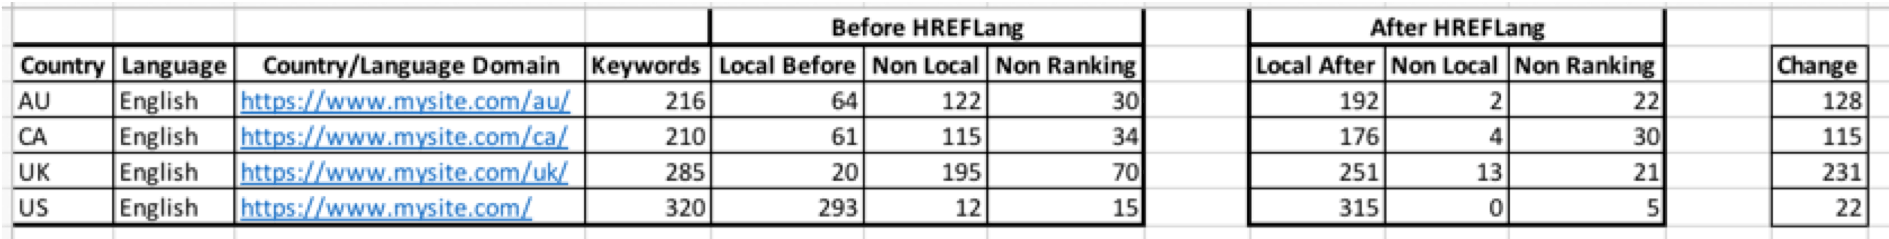 How to Develop a Solid Business Case for Hreflang Implementation